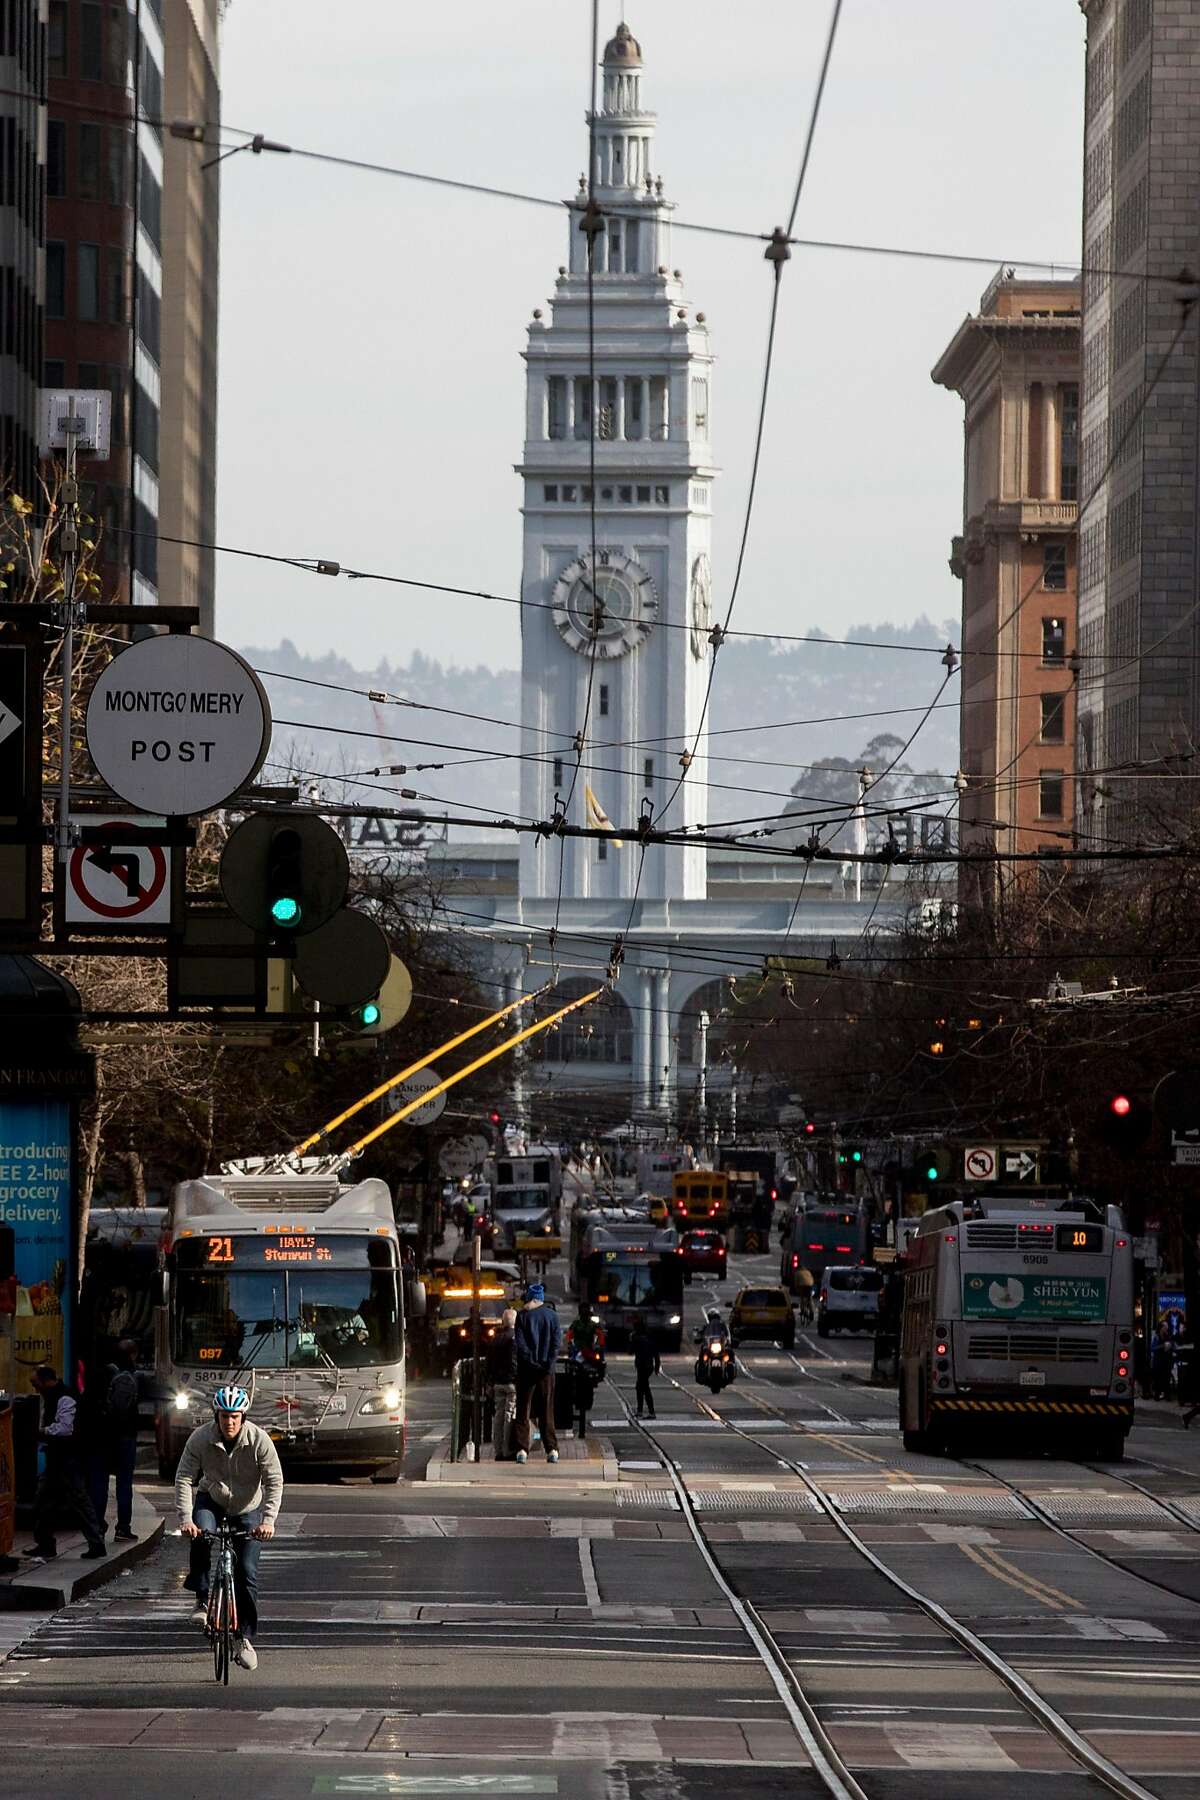 Buses and cyclists move down Market Street in San Francisco, Calif. Wednesday, January 29, 2020. Beginning January 29, private vehicles will be banned from driving along Market Street between Steuart and 10th streets, leaving it free for cyclists, pedestrians and public transit vehicles.